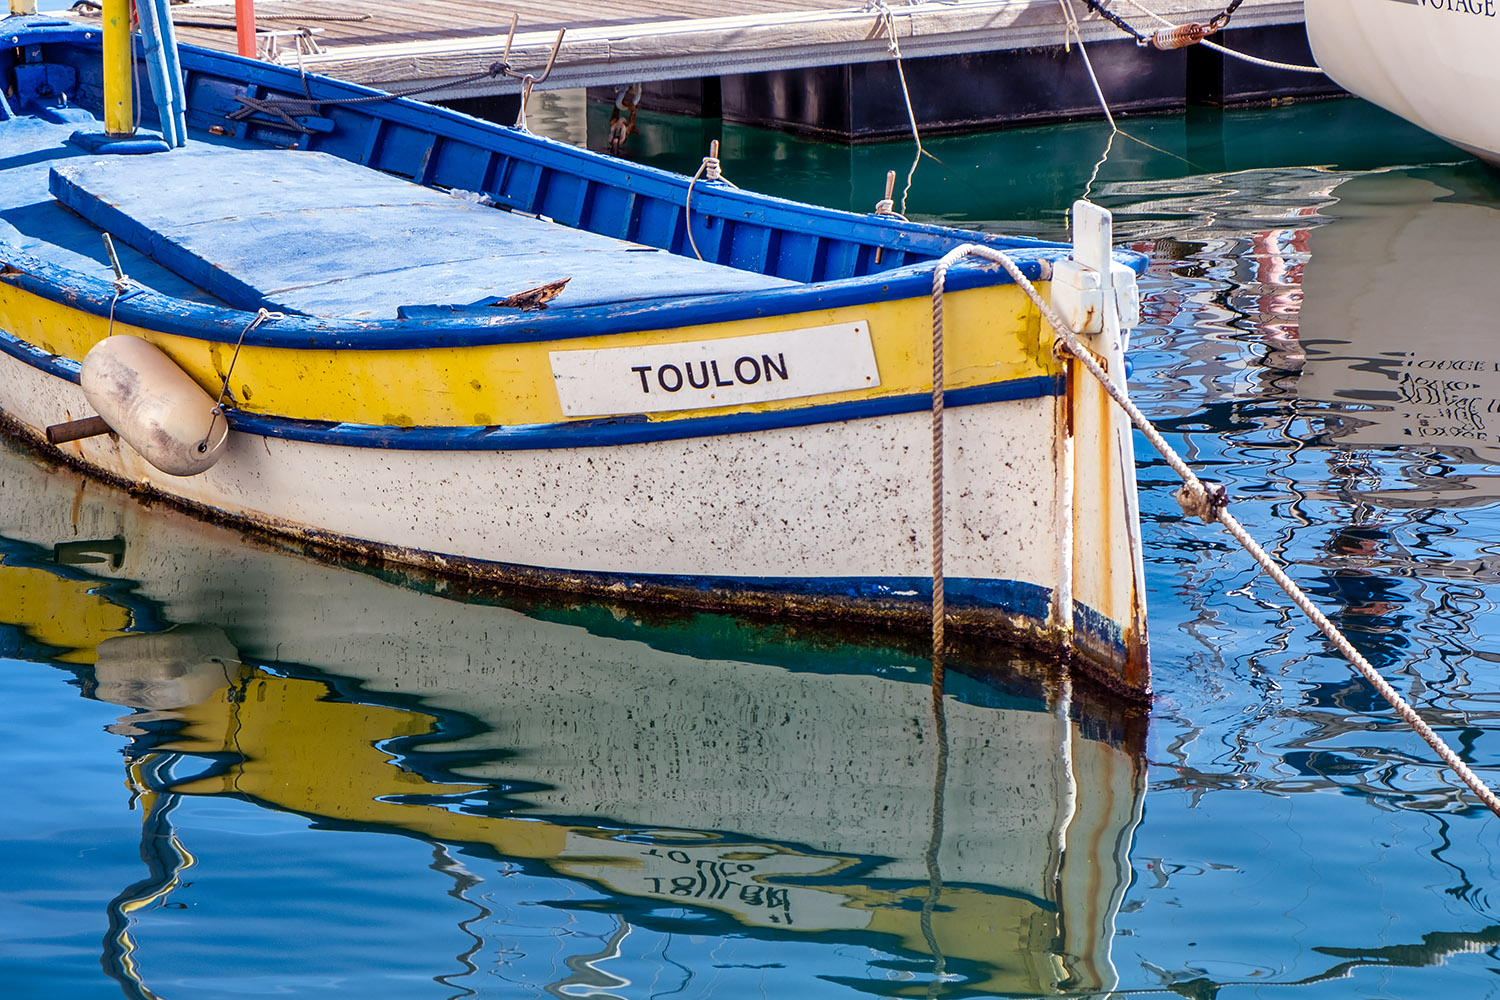 The port of Toulon accommodates everything from the smallest fishing boat...